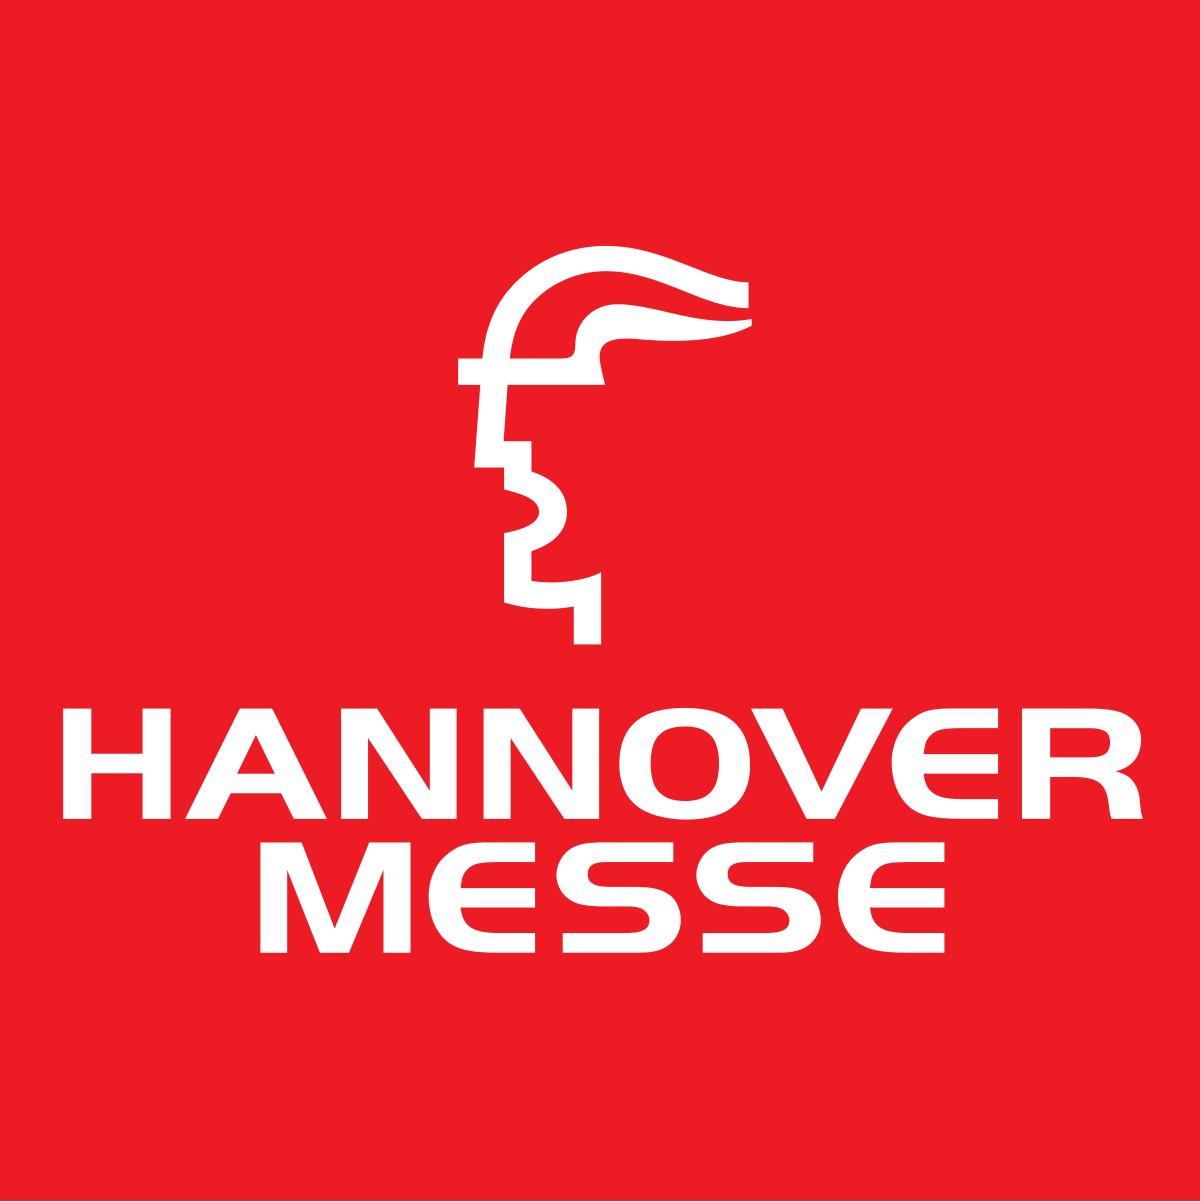 Cylinders Holding will be present at Hannover Messe from 22.4. to 26.4.